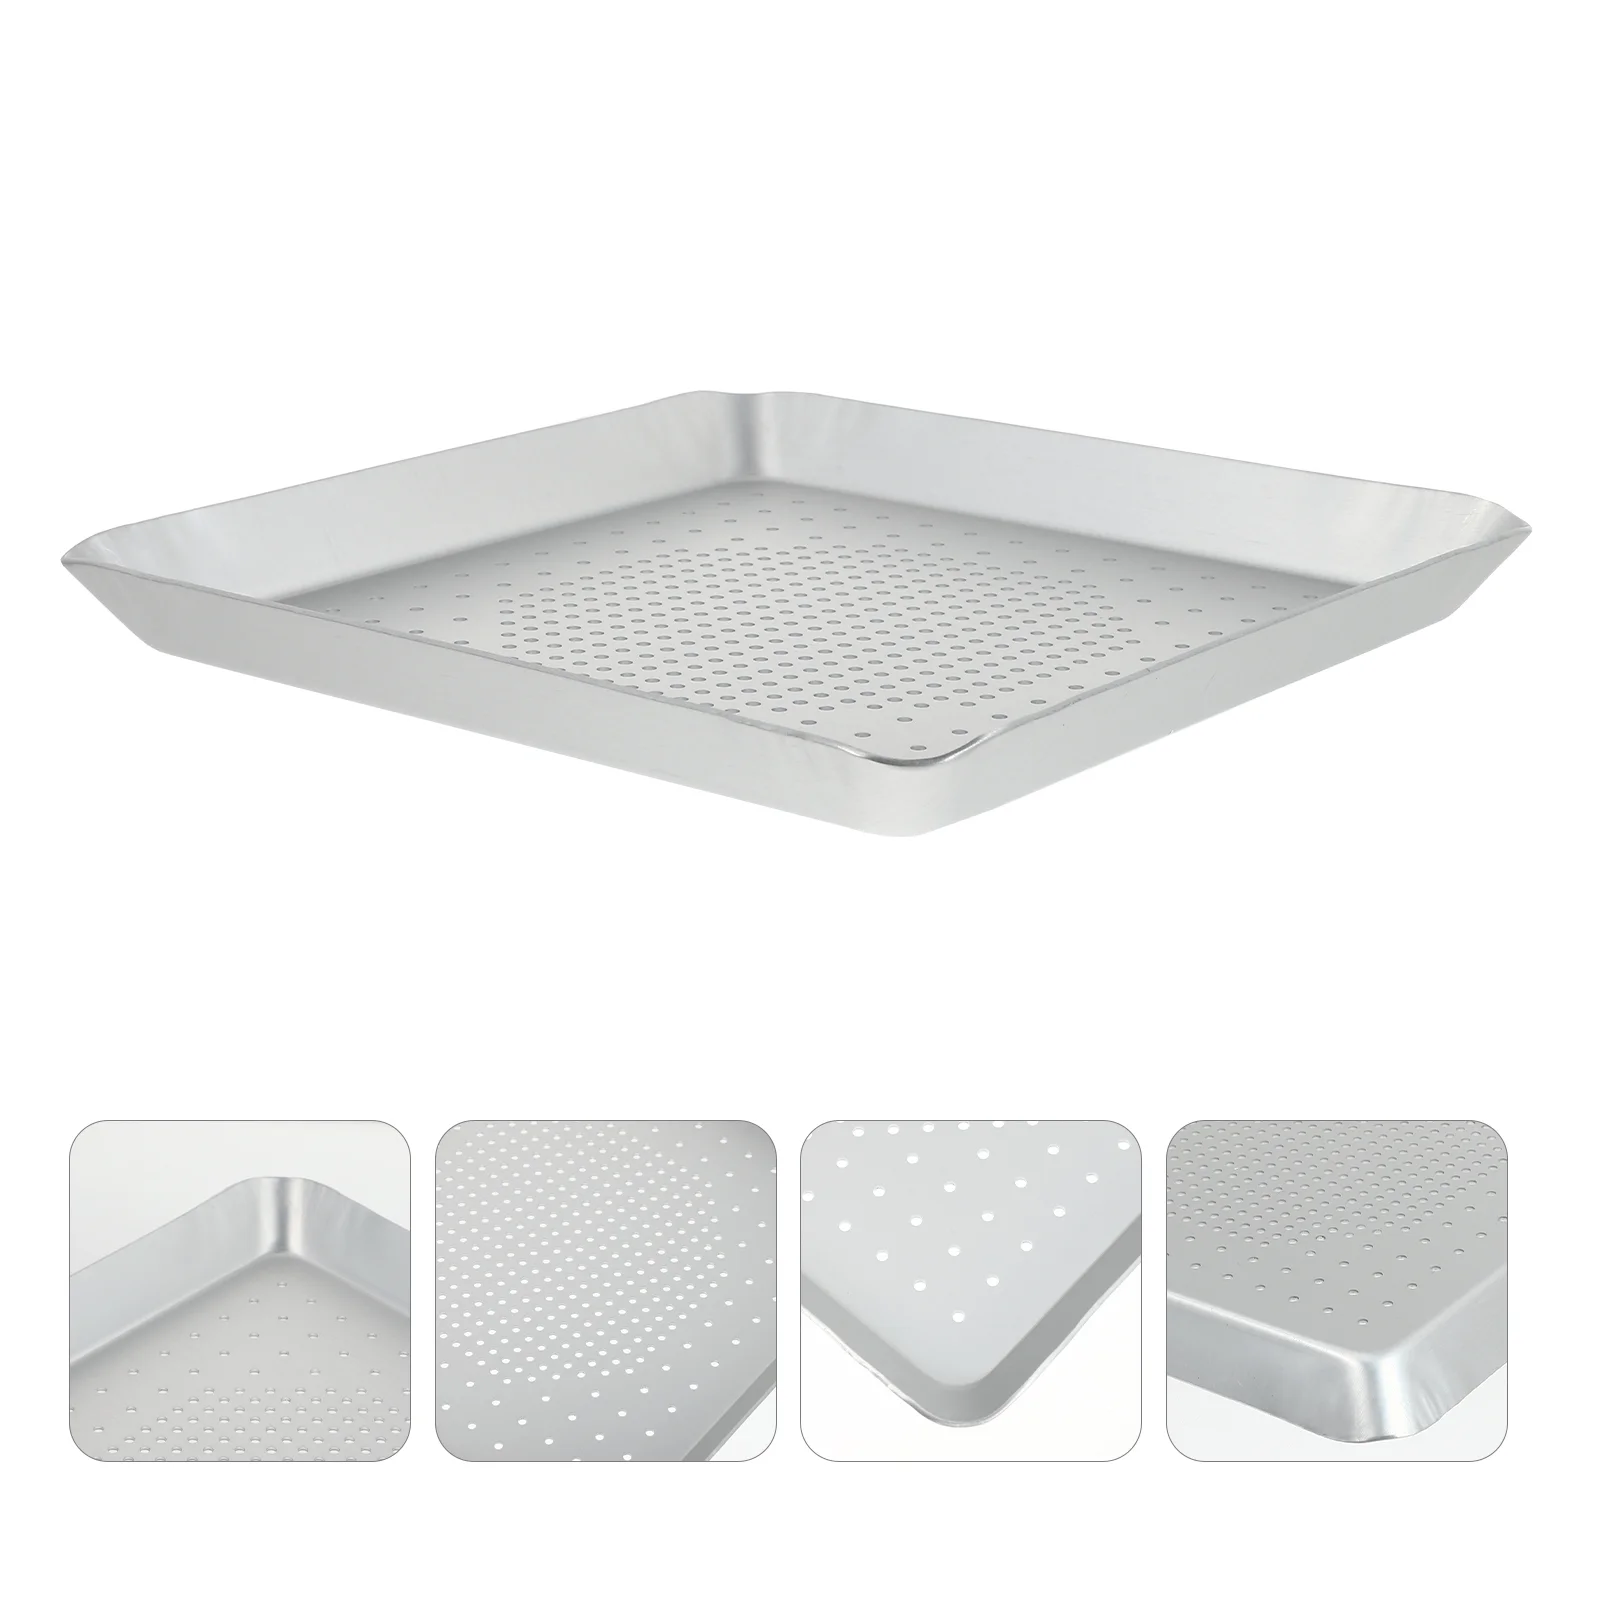 

Pizza Pan Tray Baking Square Oven Holes Crisper Non Stick Mesh Plate Perforated Cake Bakeware Pie Steel Kitchen Screen Sheet